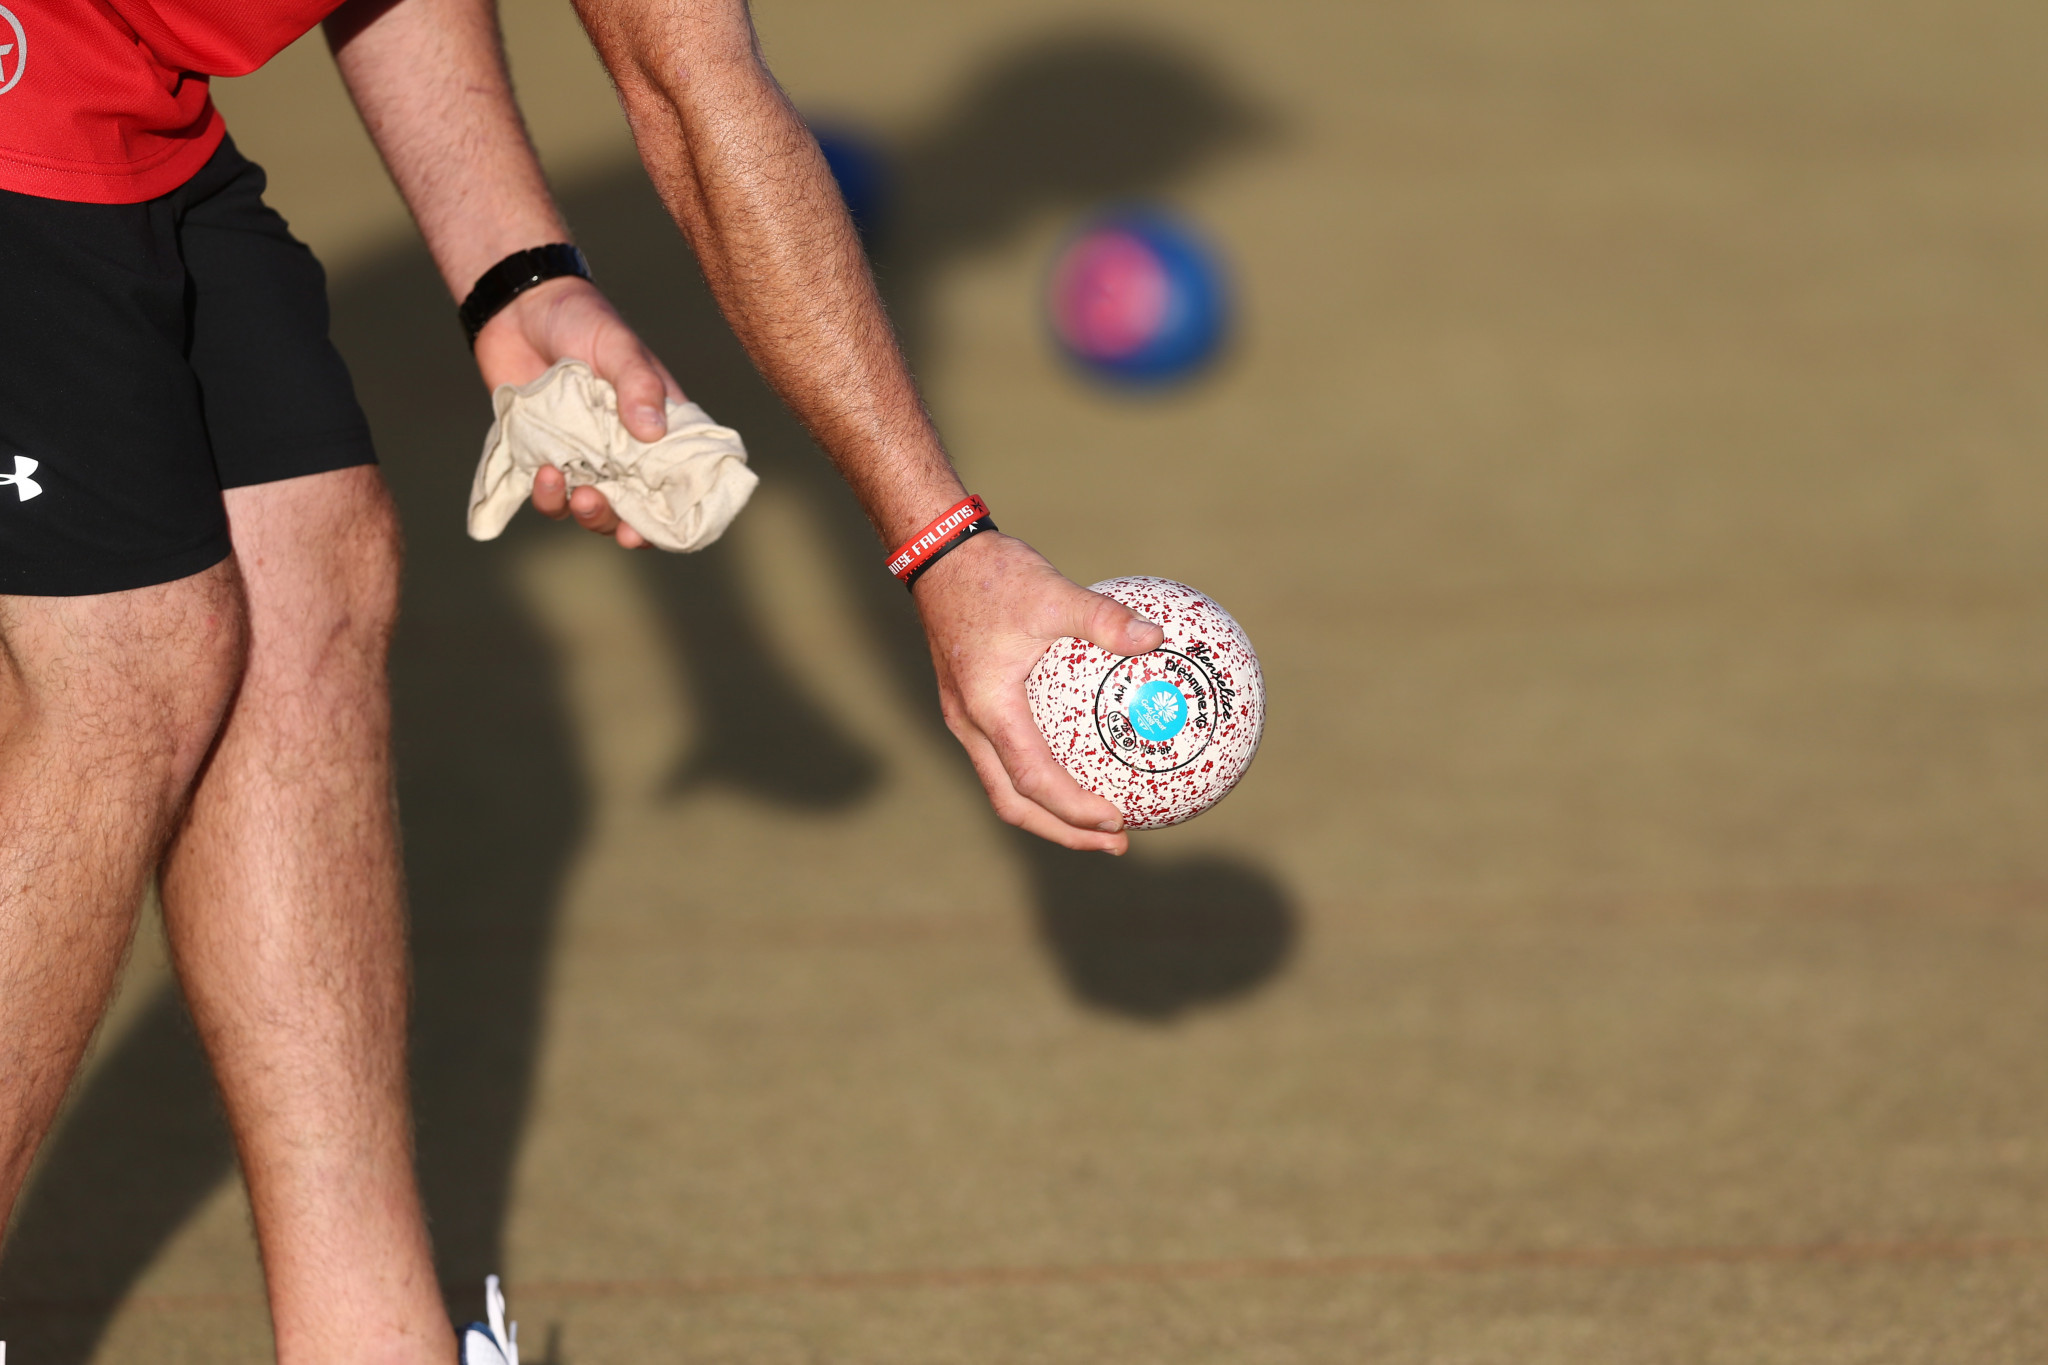 England claim overall title at European Bowls Championships